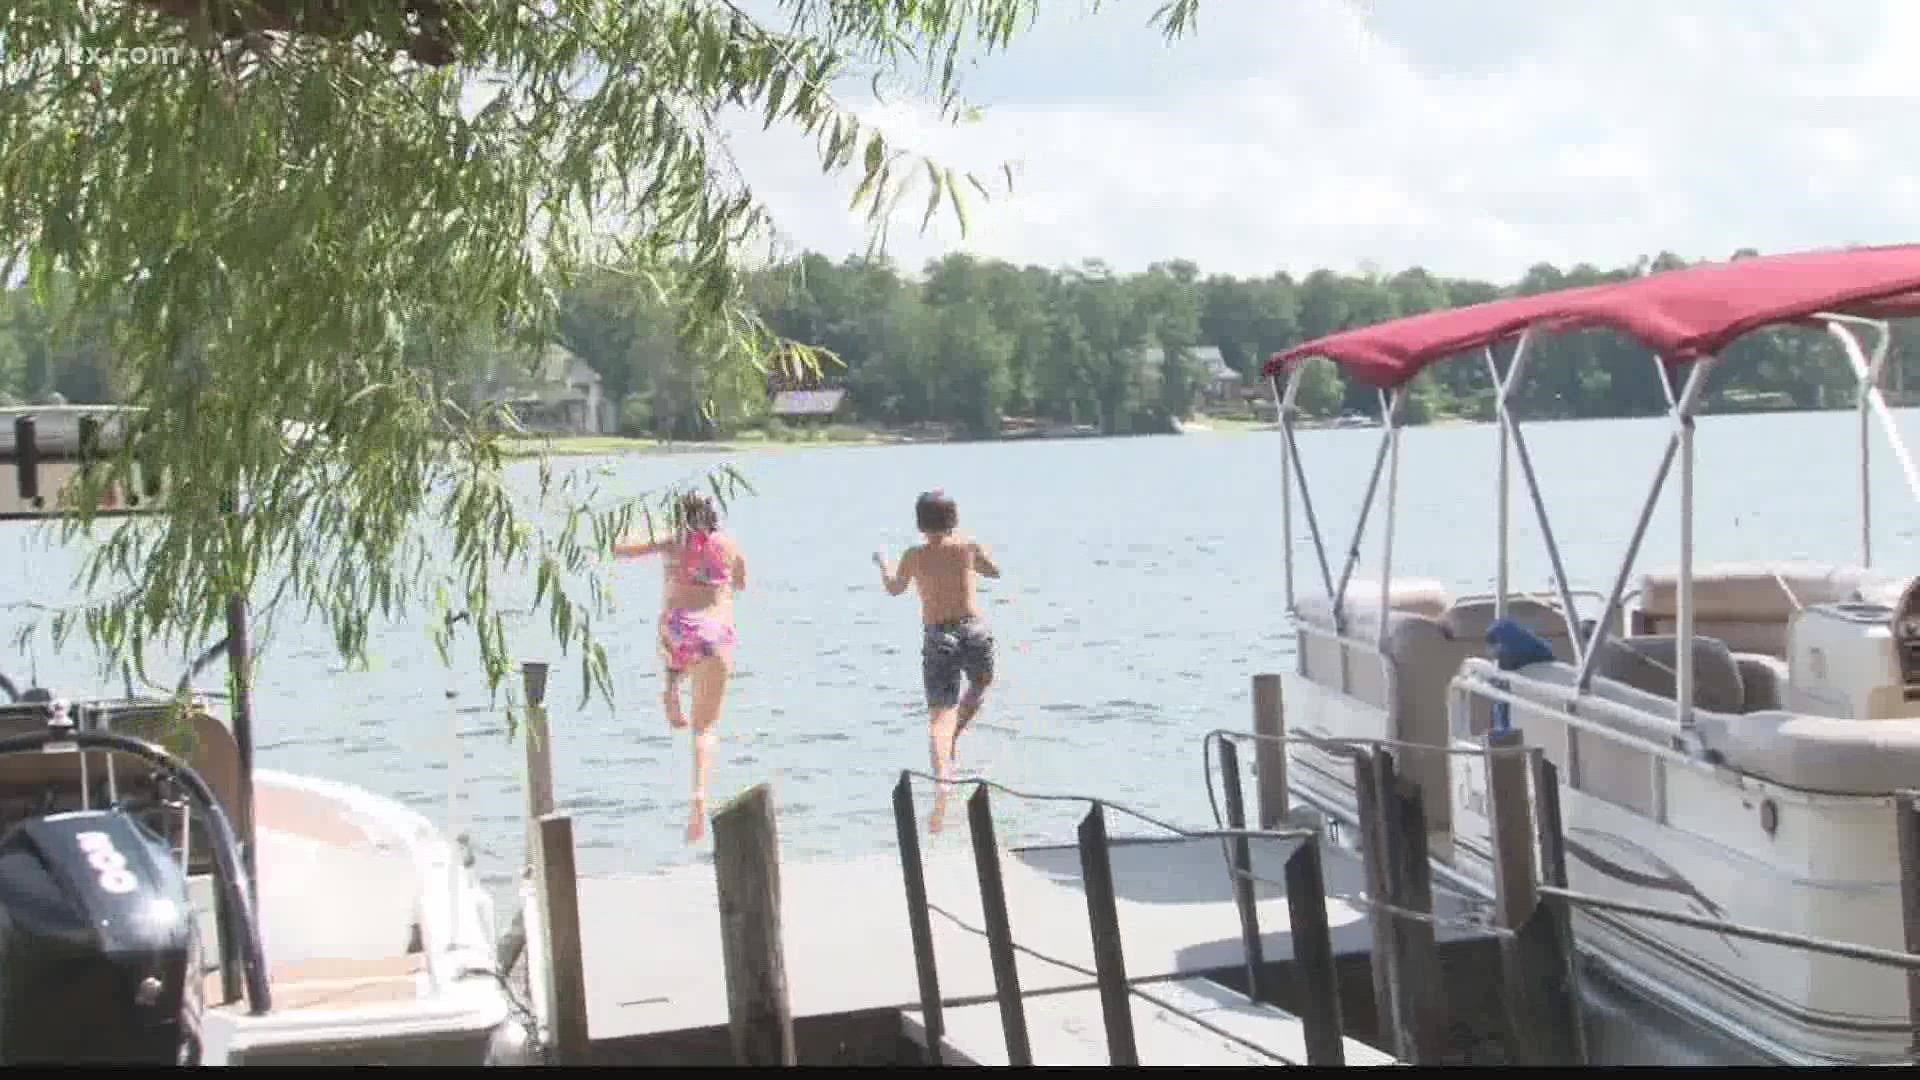 Whether you spent your morning on the lake or afternoon at the pool, Labor Day marks the official end of summer for many Midlands families.